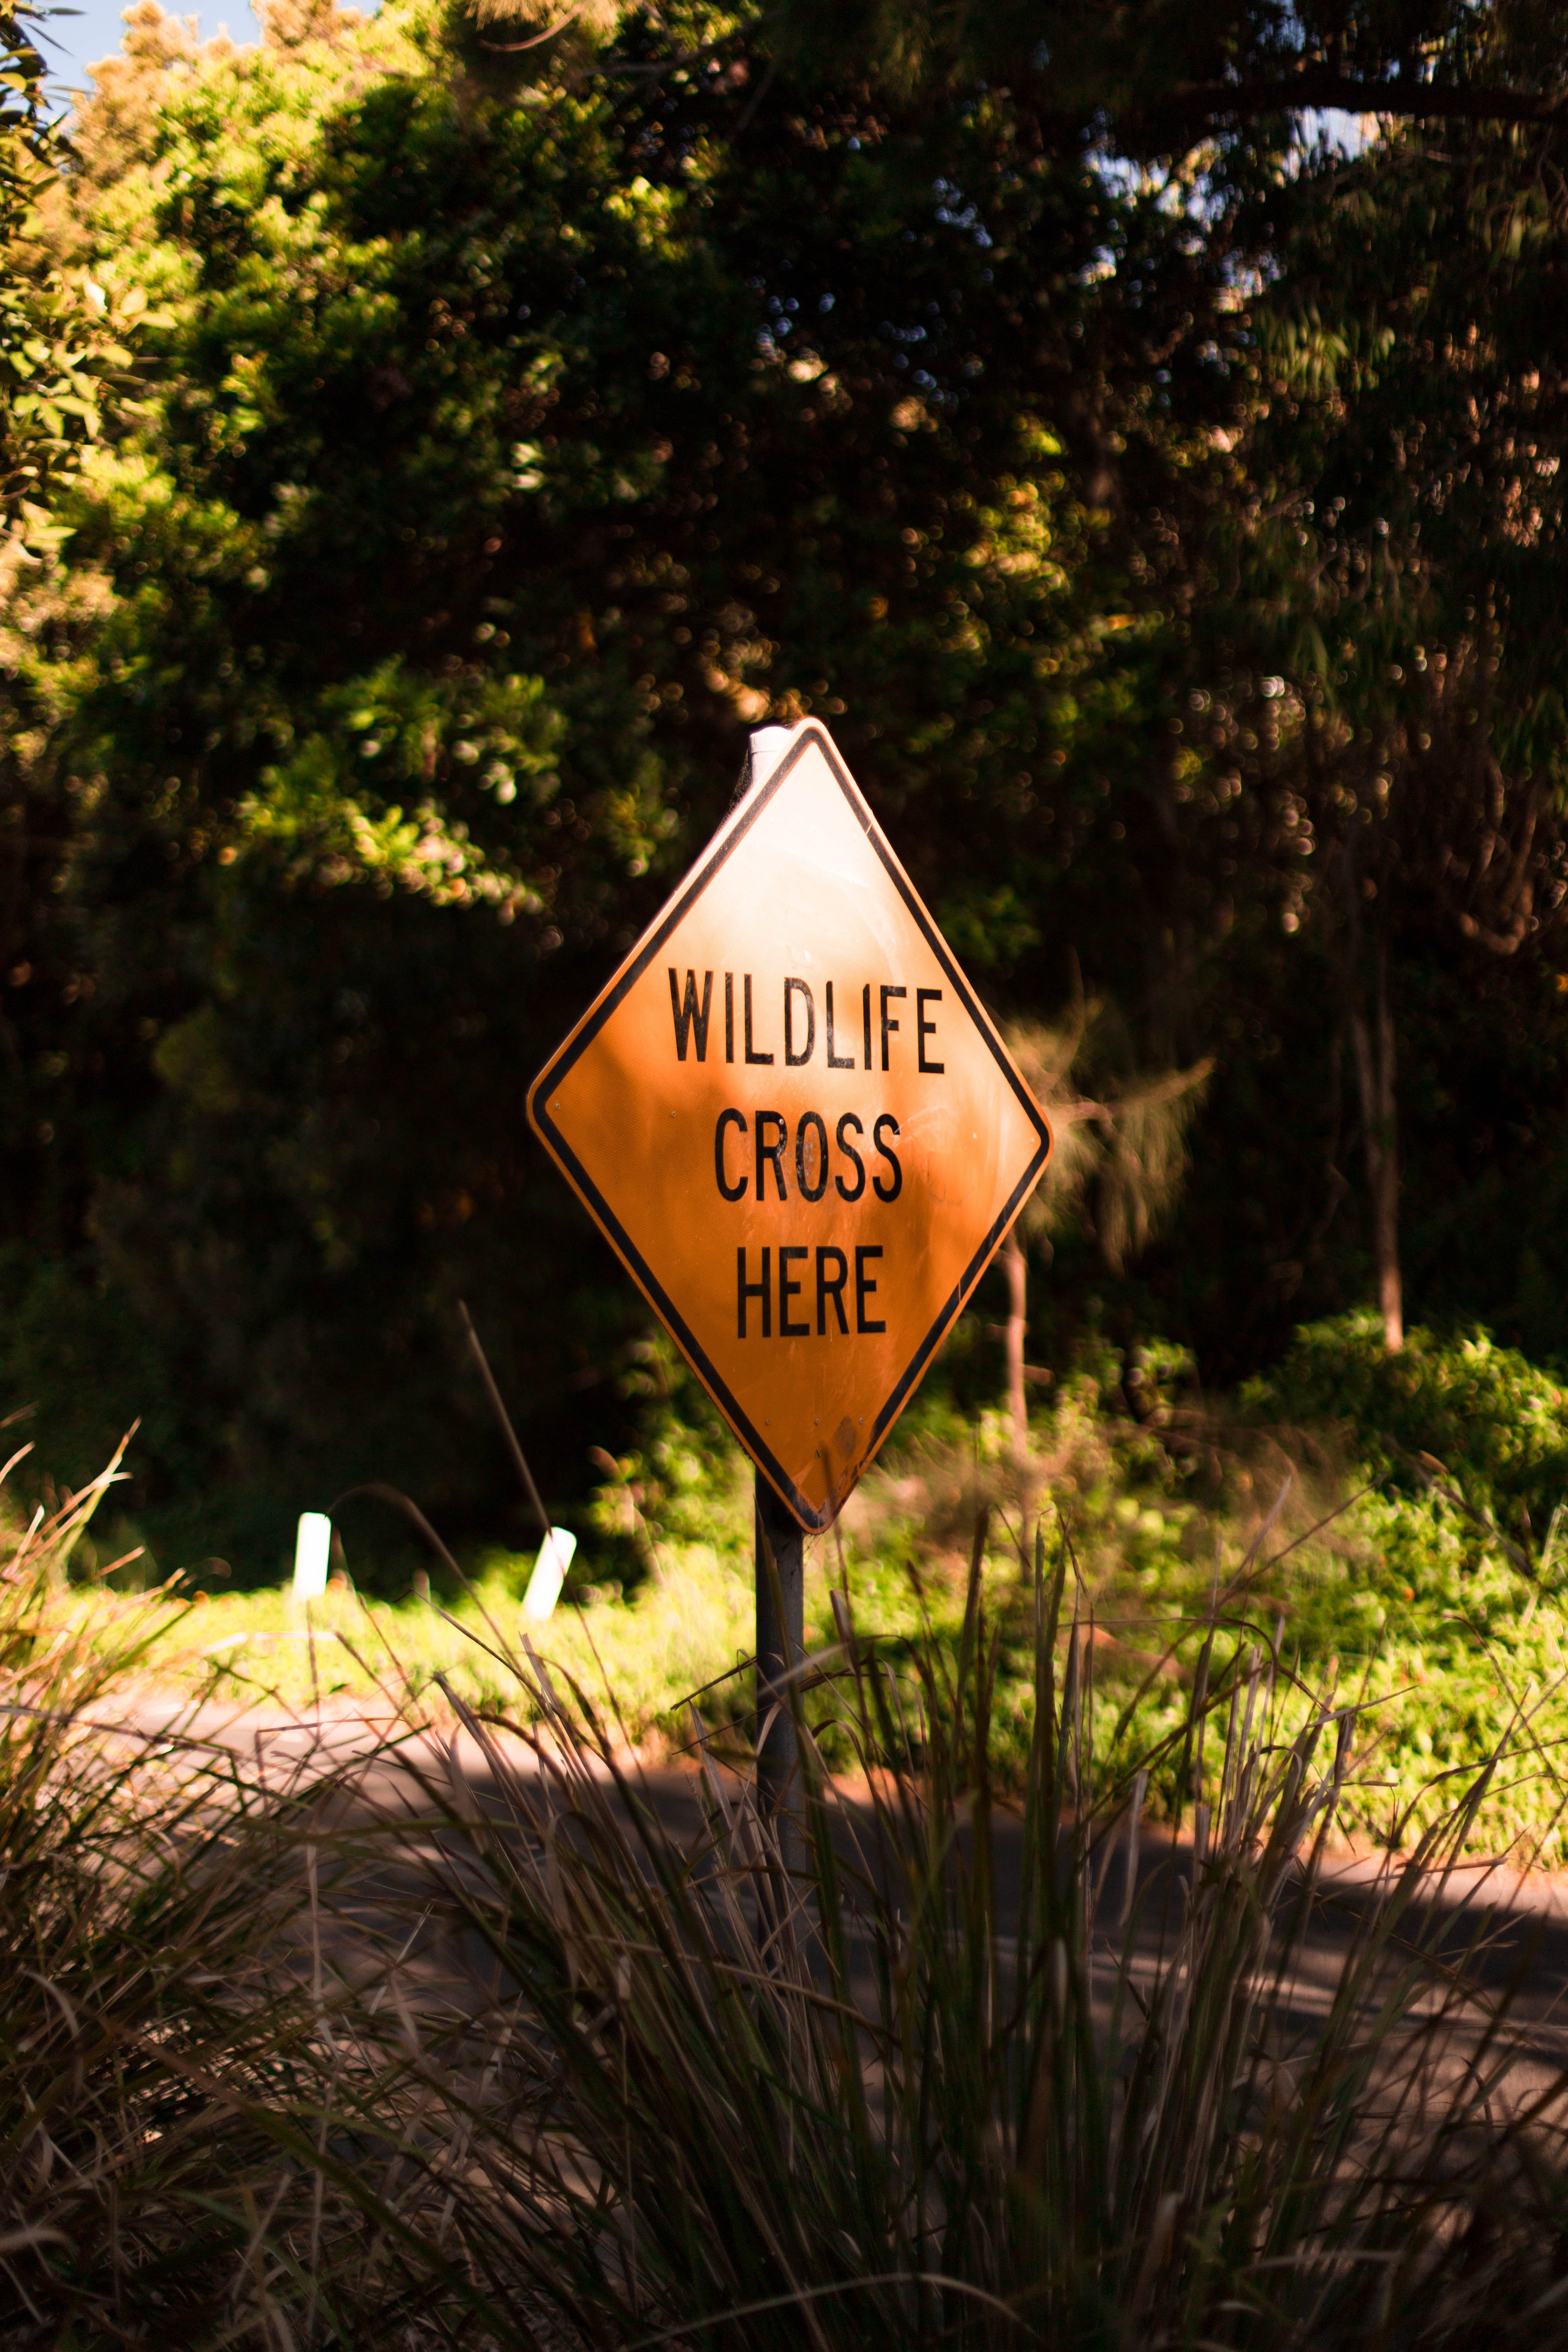 A yellow road sign warns motorist that wildlife animals use this part of the road for crossing | Photo: Unsplash/ Yoann Laheurte